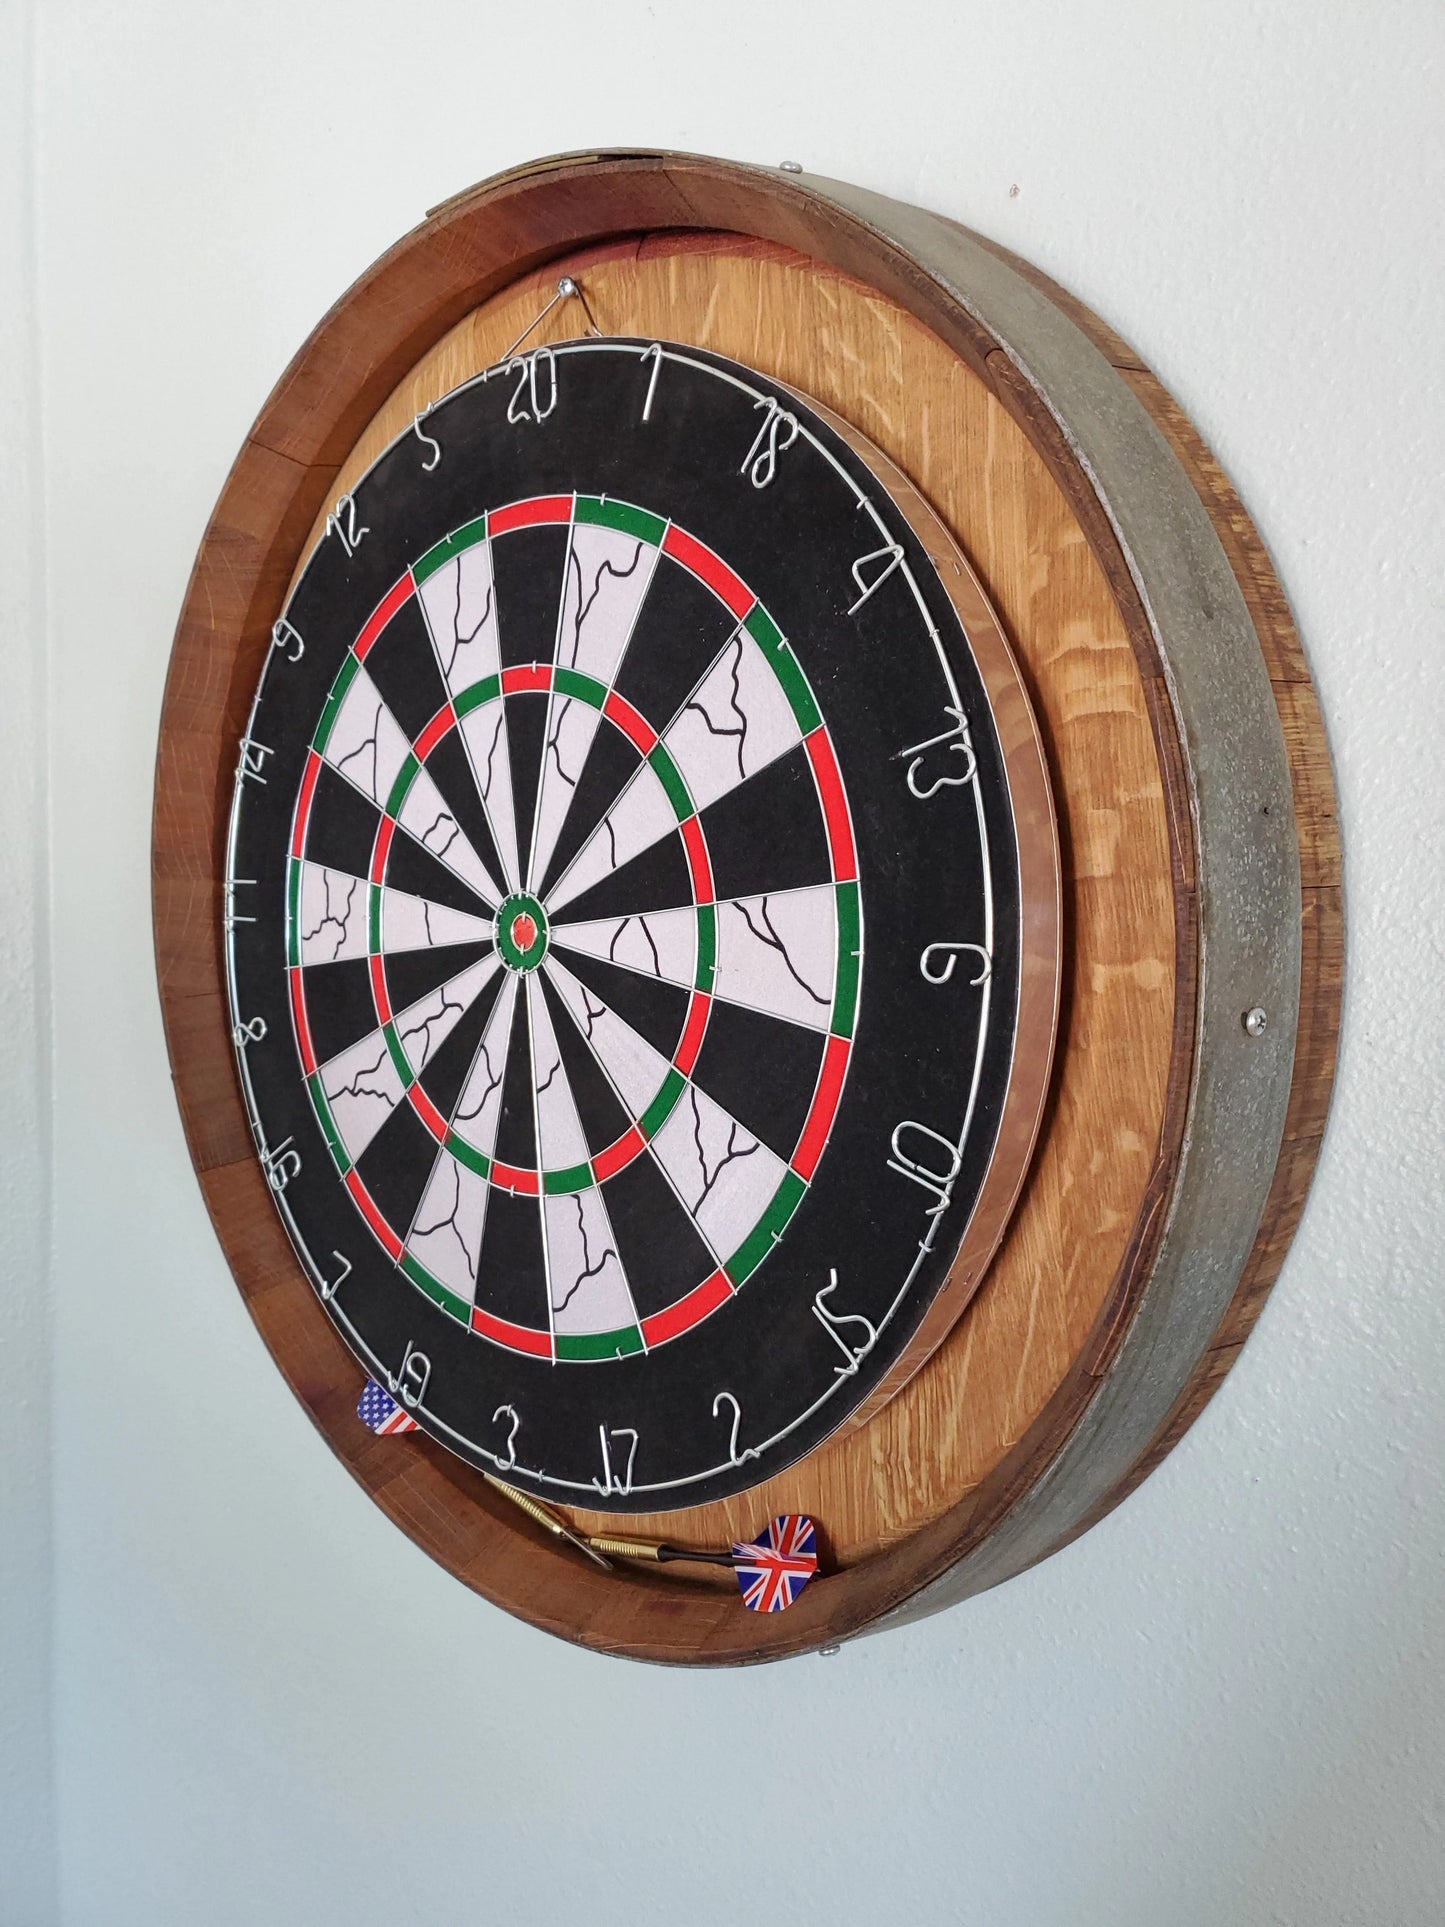 Side view of the Barrel Head Dartboard, complete with dartboard and six weighted darts